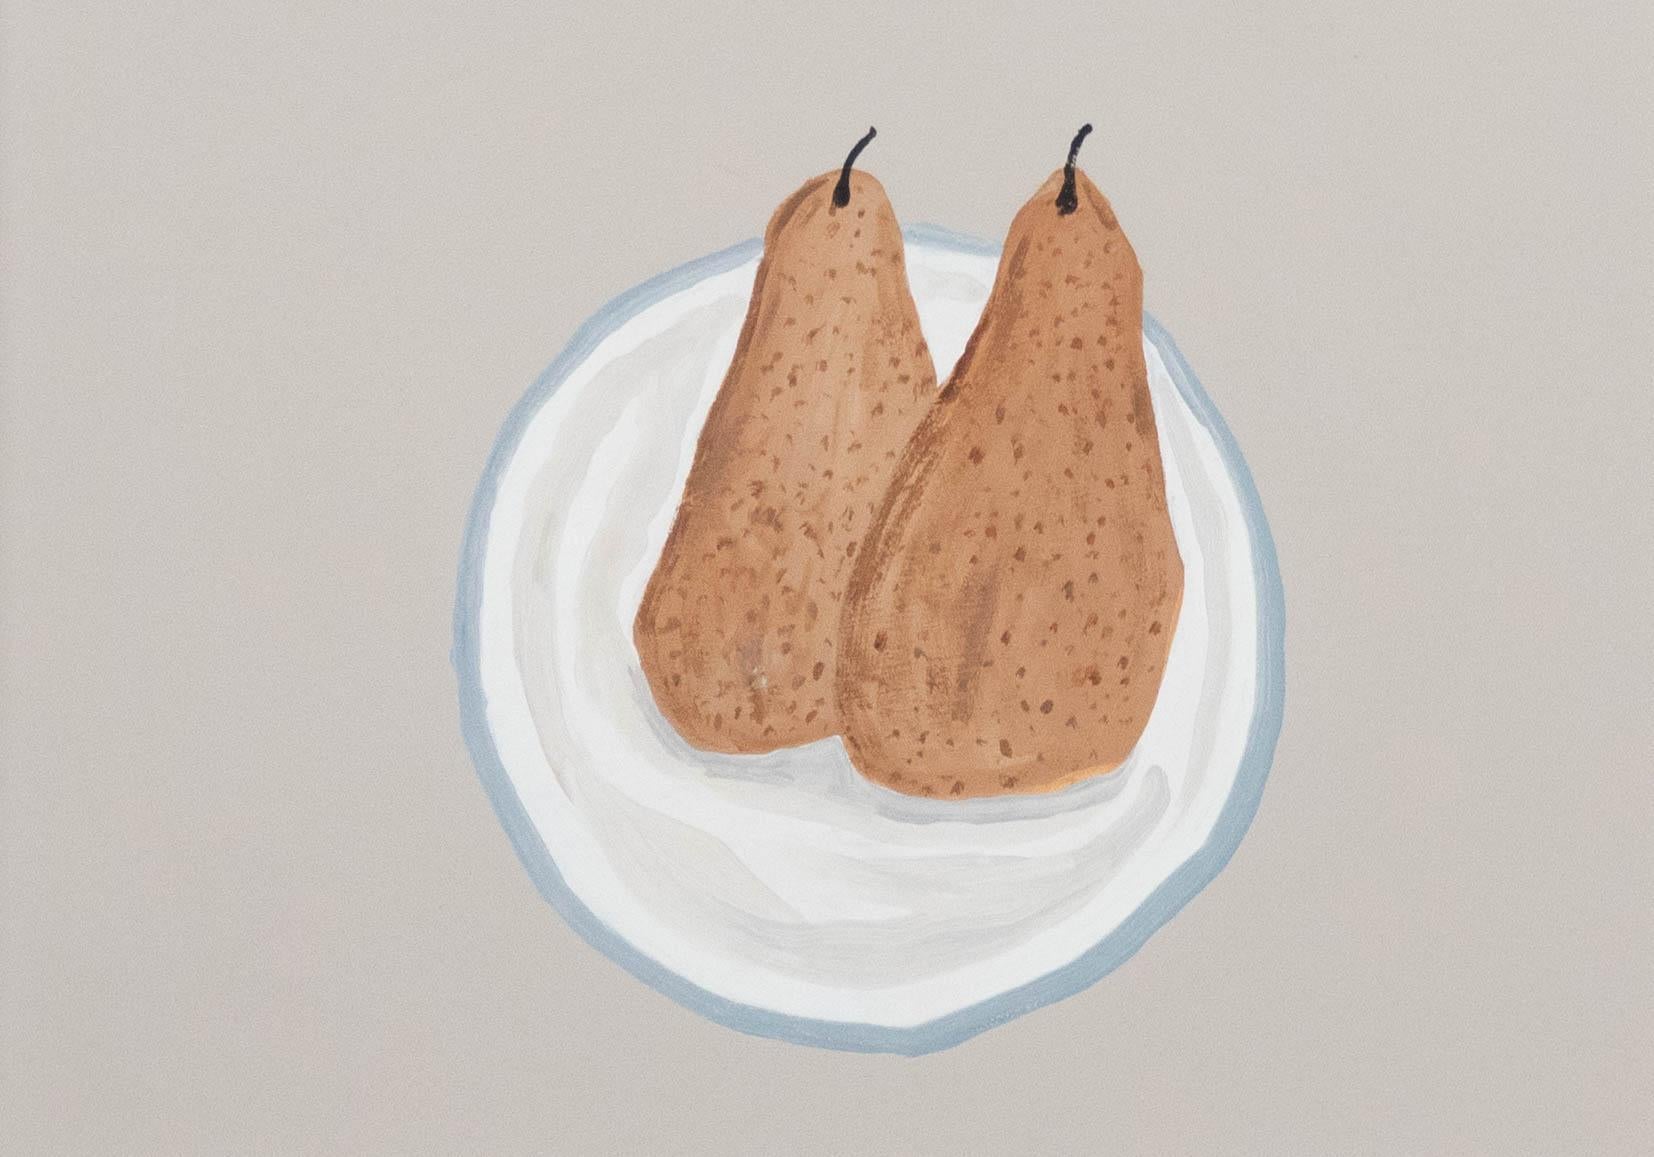 Contemporary Acrylic - Pears on a Plate - Painting by Unknown